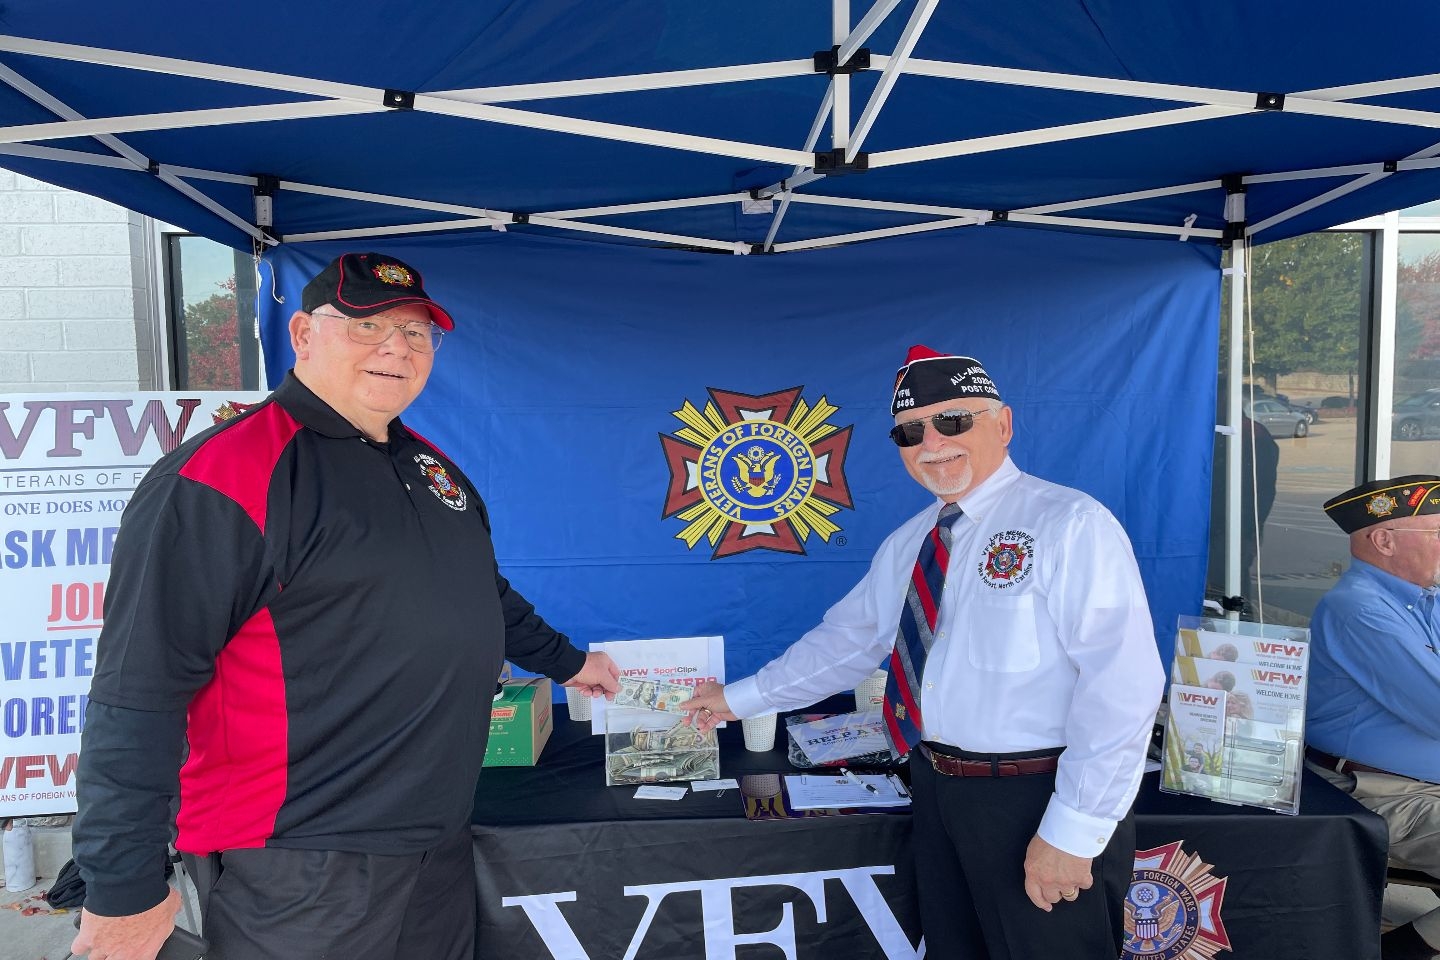 Howard Lowdermilk and Joe Csuka are shown entering a $100 bill received from a Wake Forest citizen into the donation container. The VFW partners with Sport Clips each year leading into Veterans' Day to raise money for the Help-a-Hero Scholarship Fund. This provides scholarships for higher education to Active Military and Veterans.